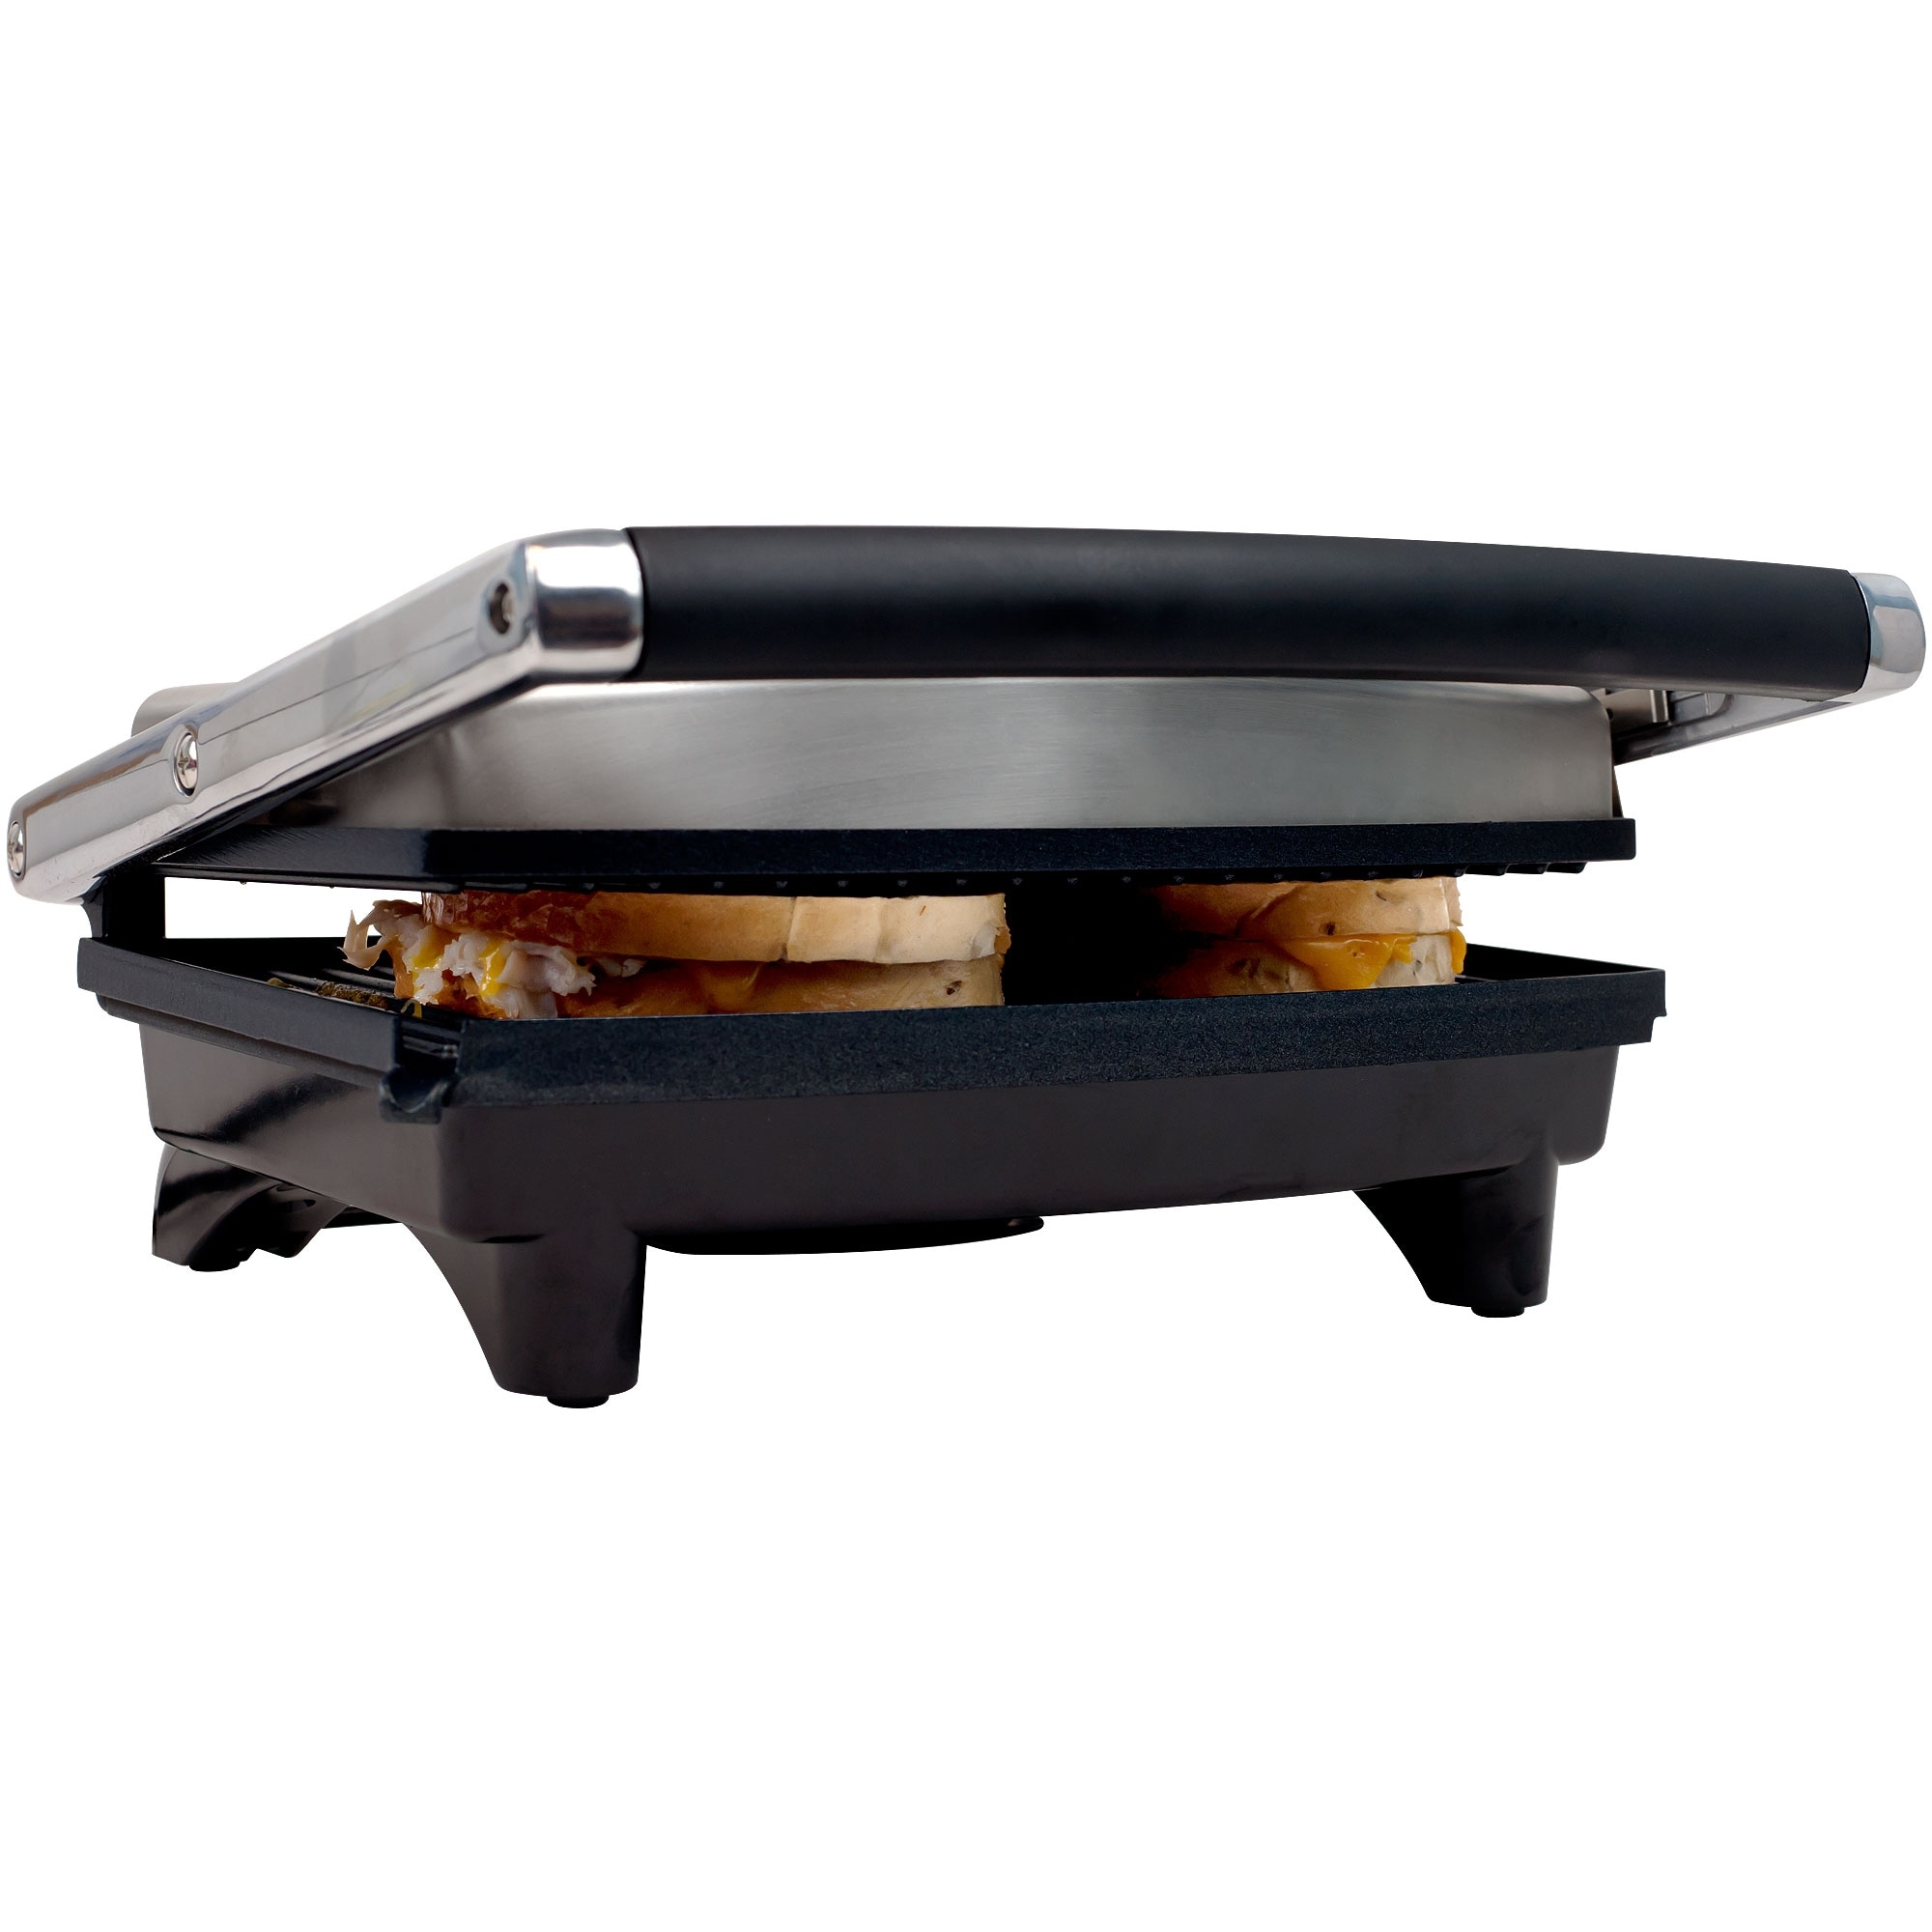 https://ak1.ostkcdn.com/images/products/is/images/direct/4522fe48c447d2cd9d71879c5b36e82f59c6e23b/Chef-Buddy-Non-stick-Grill-and-Panini-Press.jpg